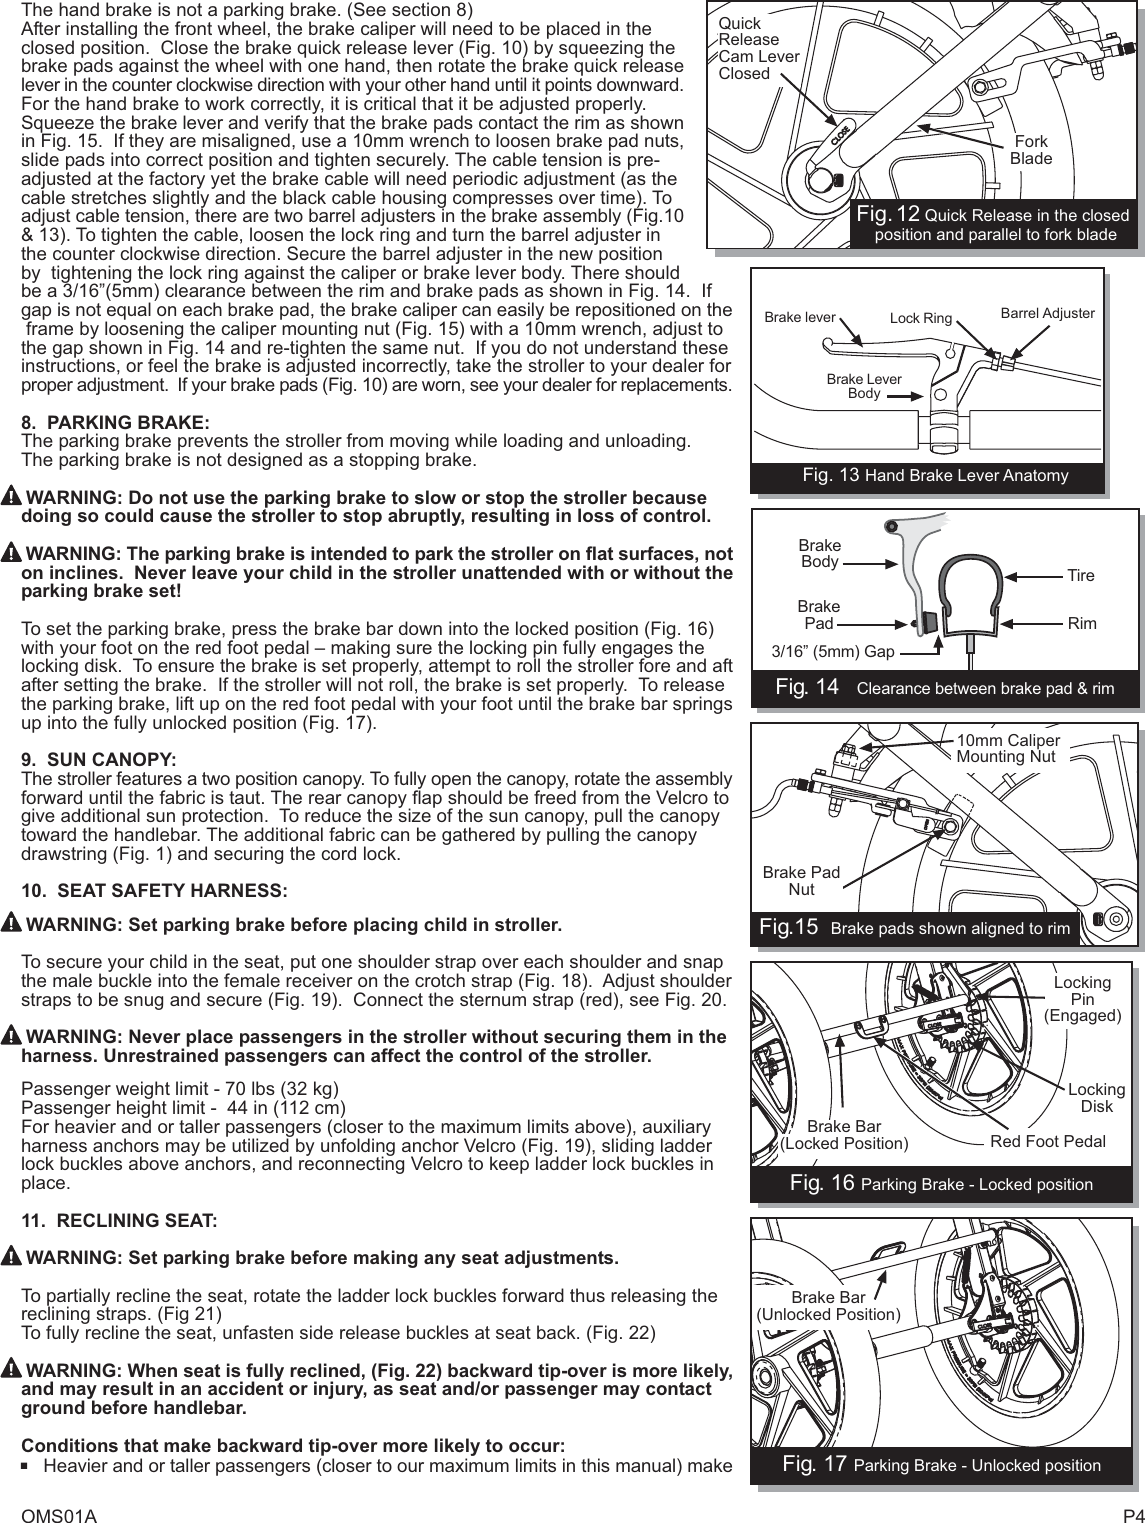 Page 4 of 7 - Bob Bob-Oms09B-Users-Manual- OMS01A.FH7  Bob-oms09b-users-manual